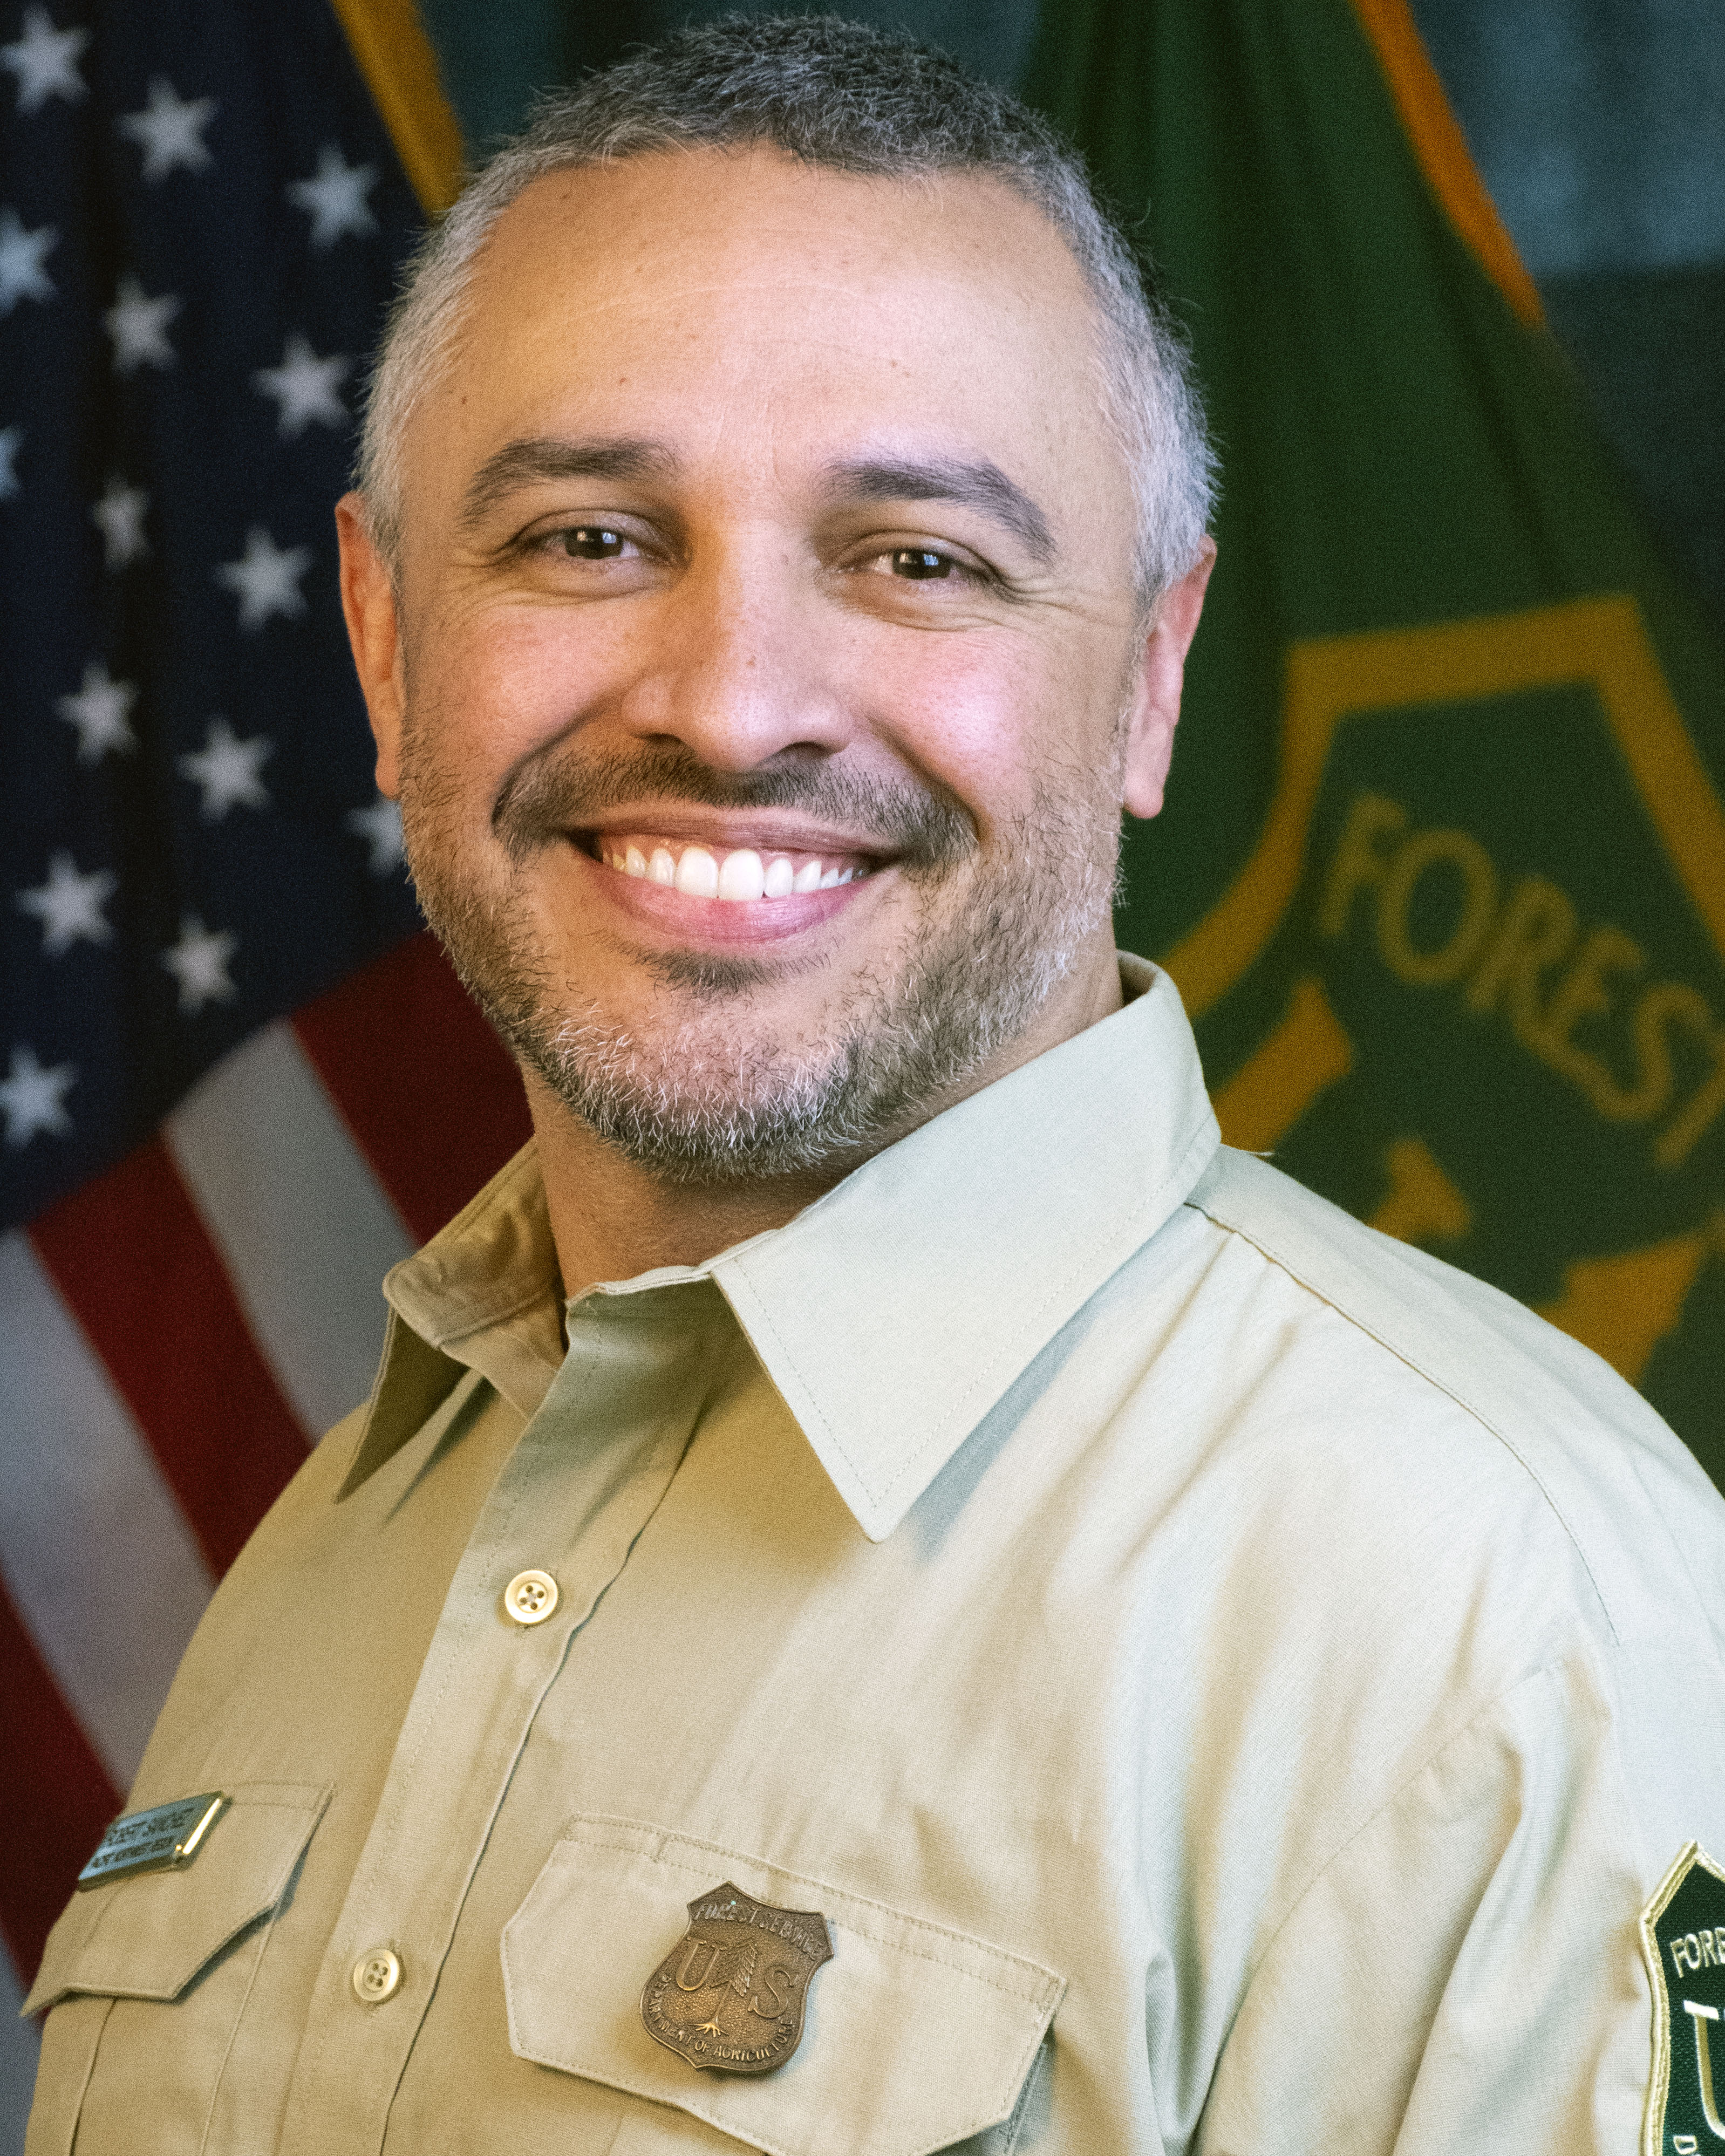 portrait of a man in a forest service uniform with the US and Forest Service flags behind him